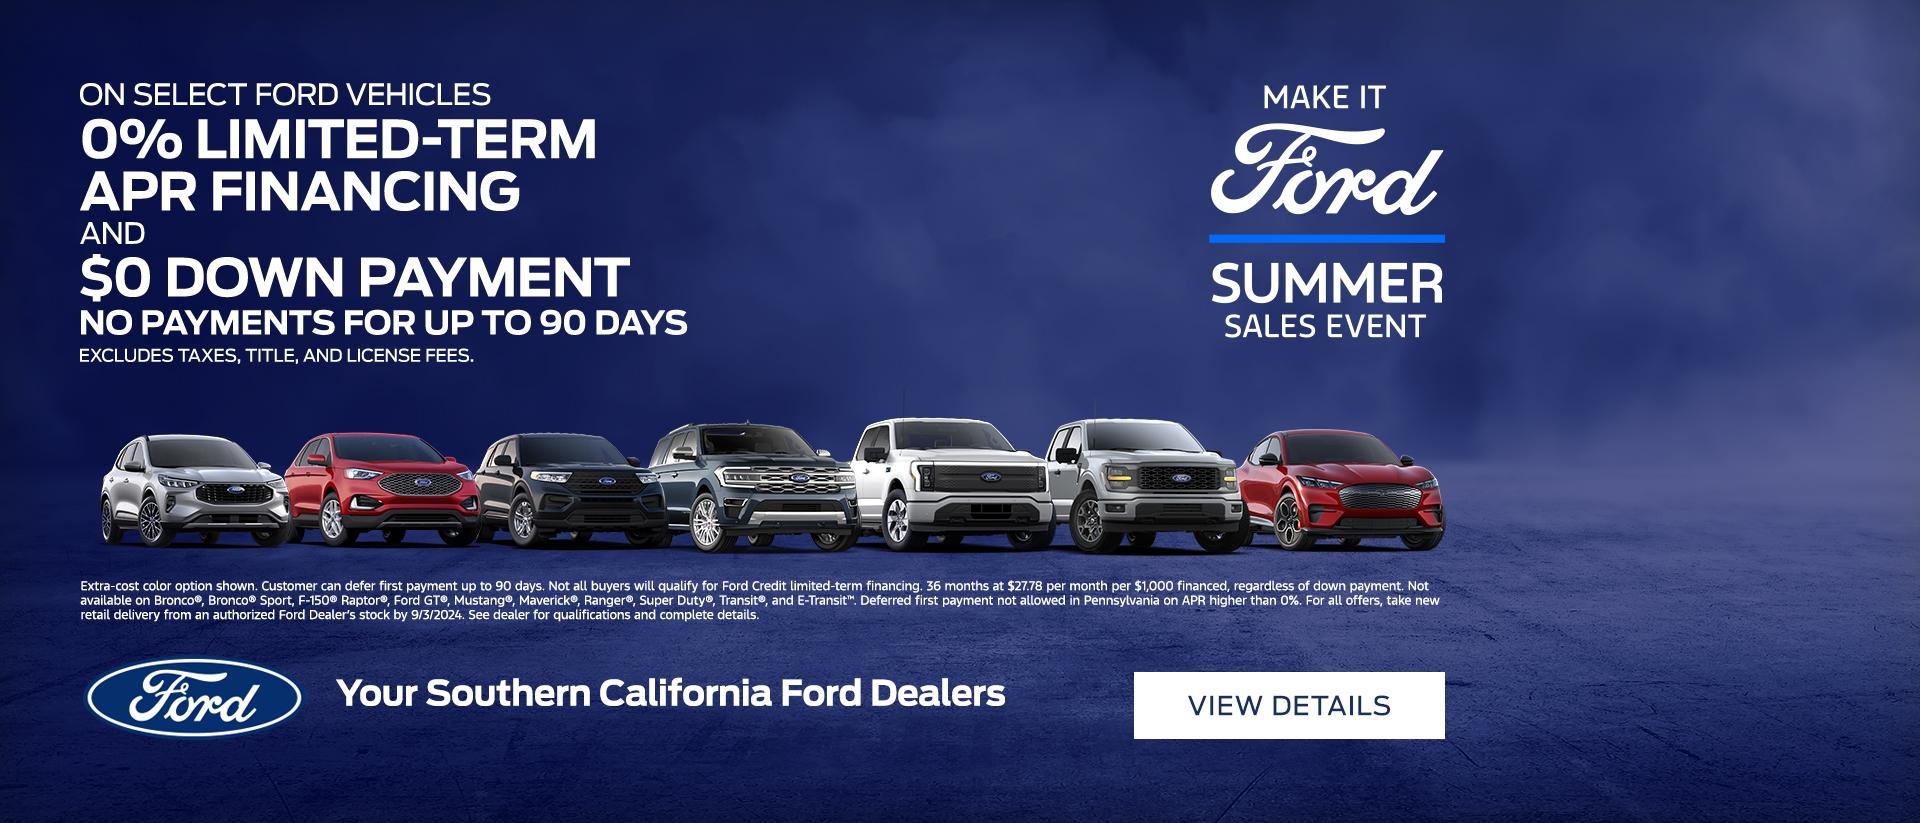 Make it Ford Summer Sales Event | Southern California Ford Dealers